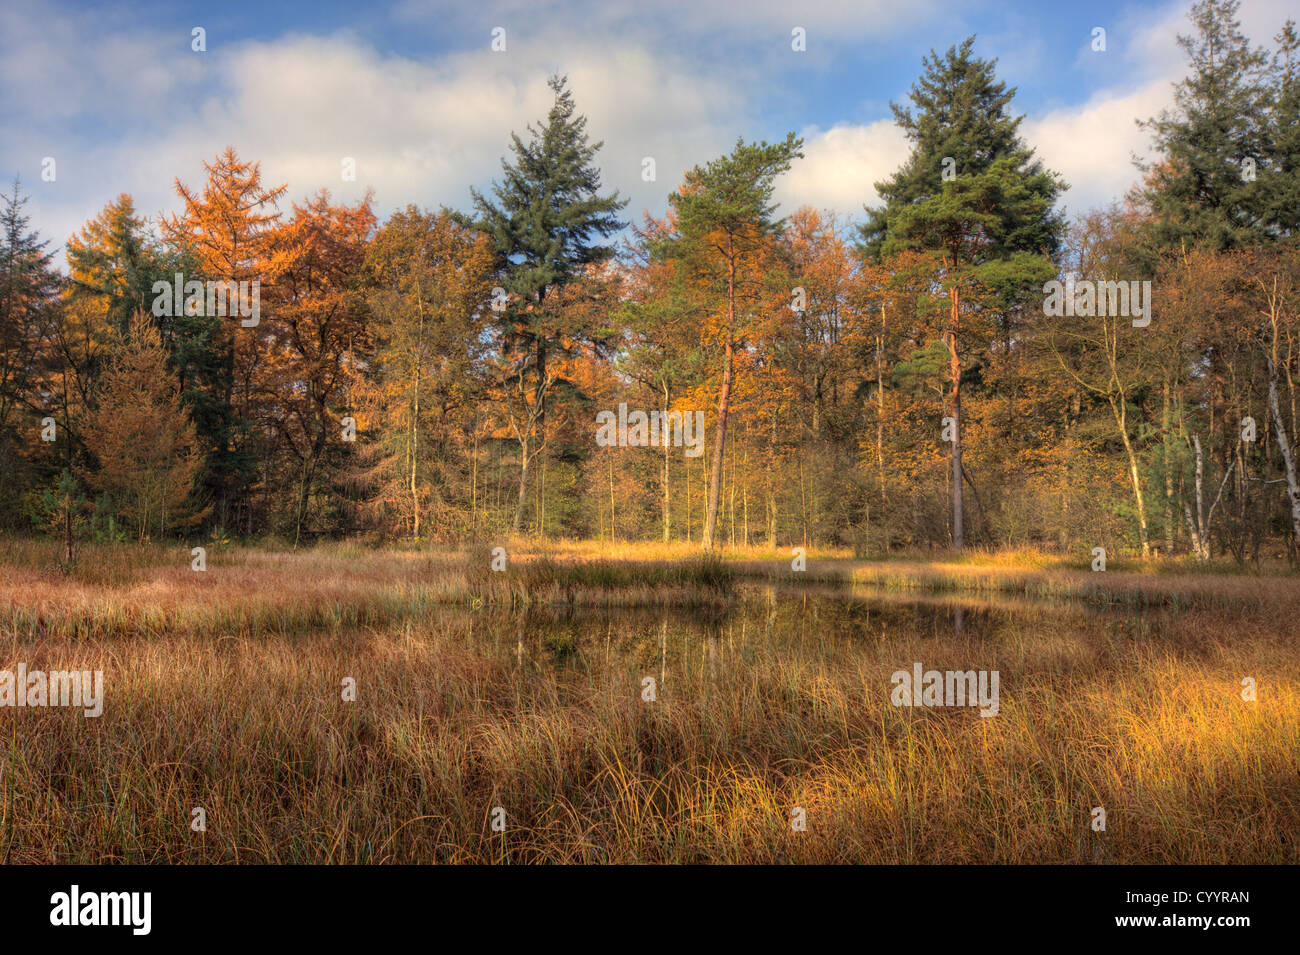 Small lake in forest in autumn colors Stock Photo